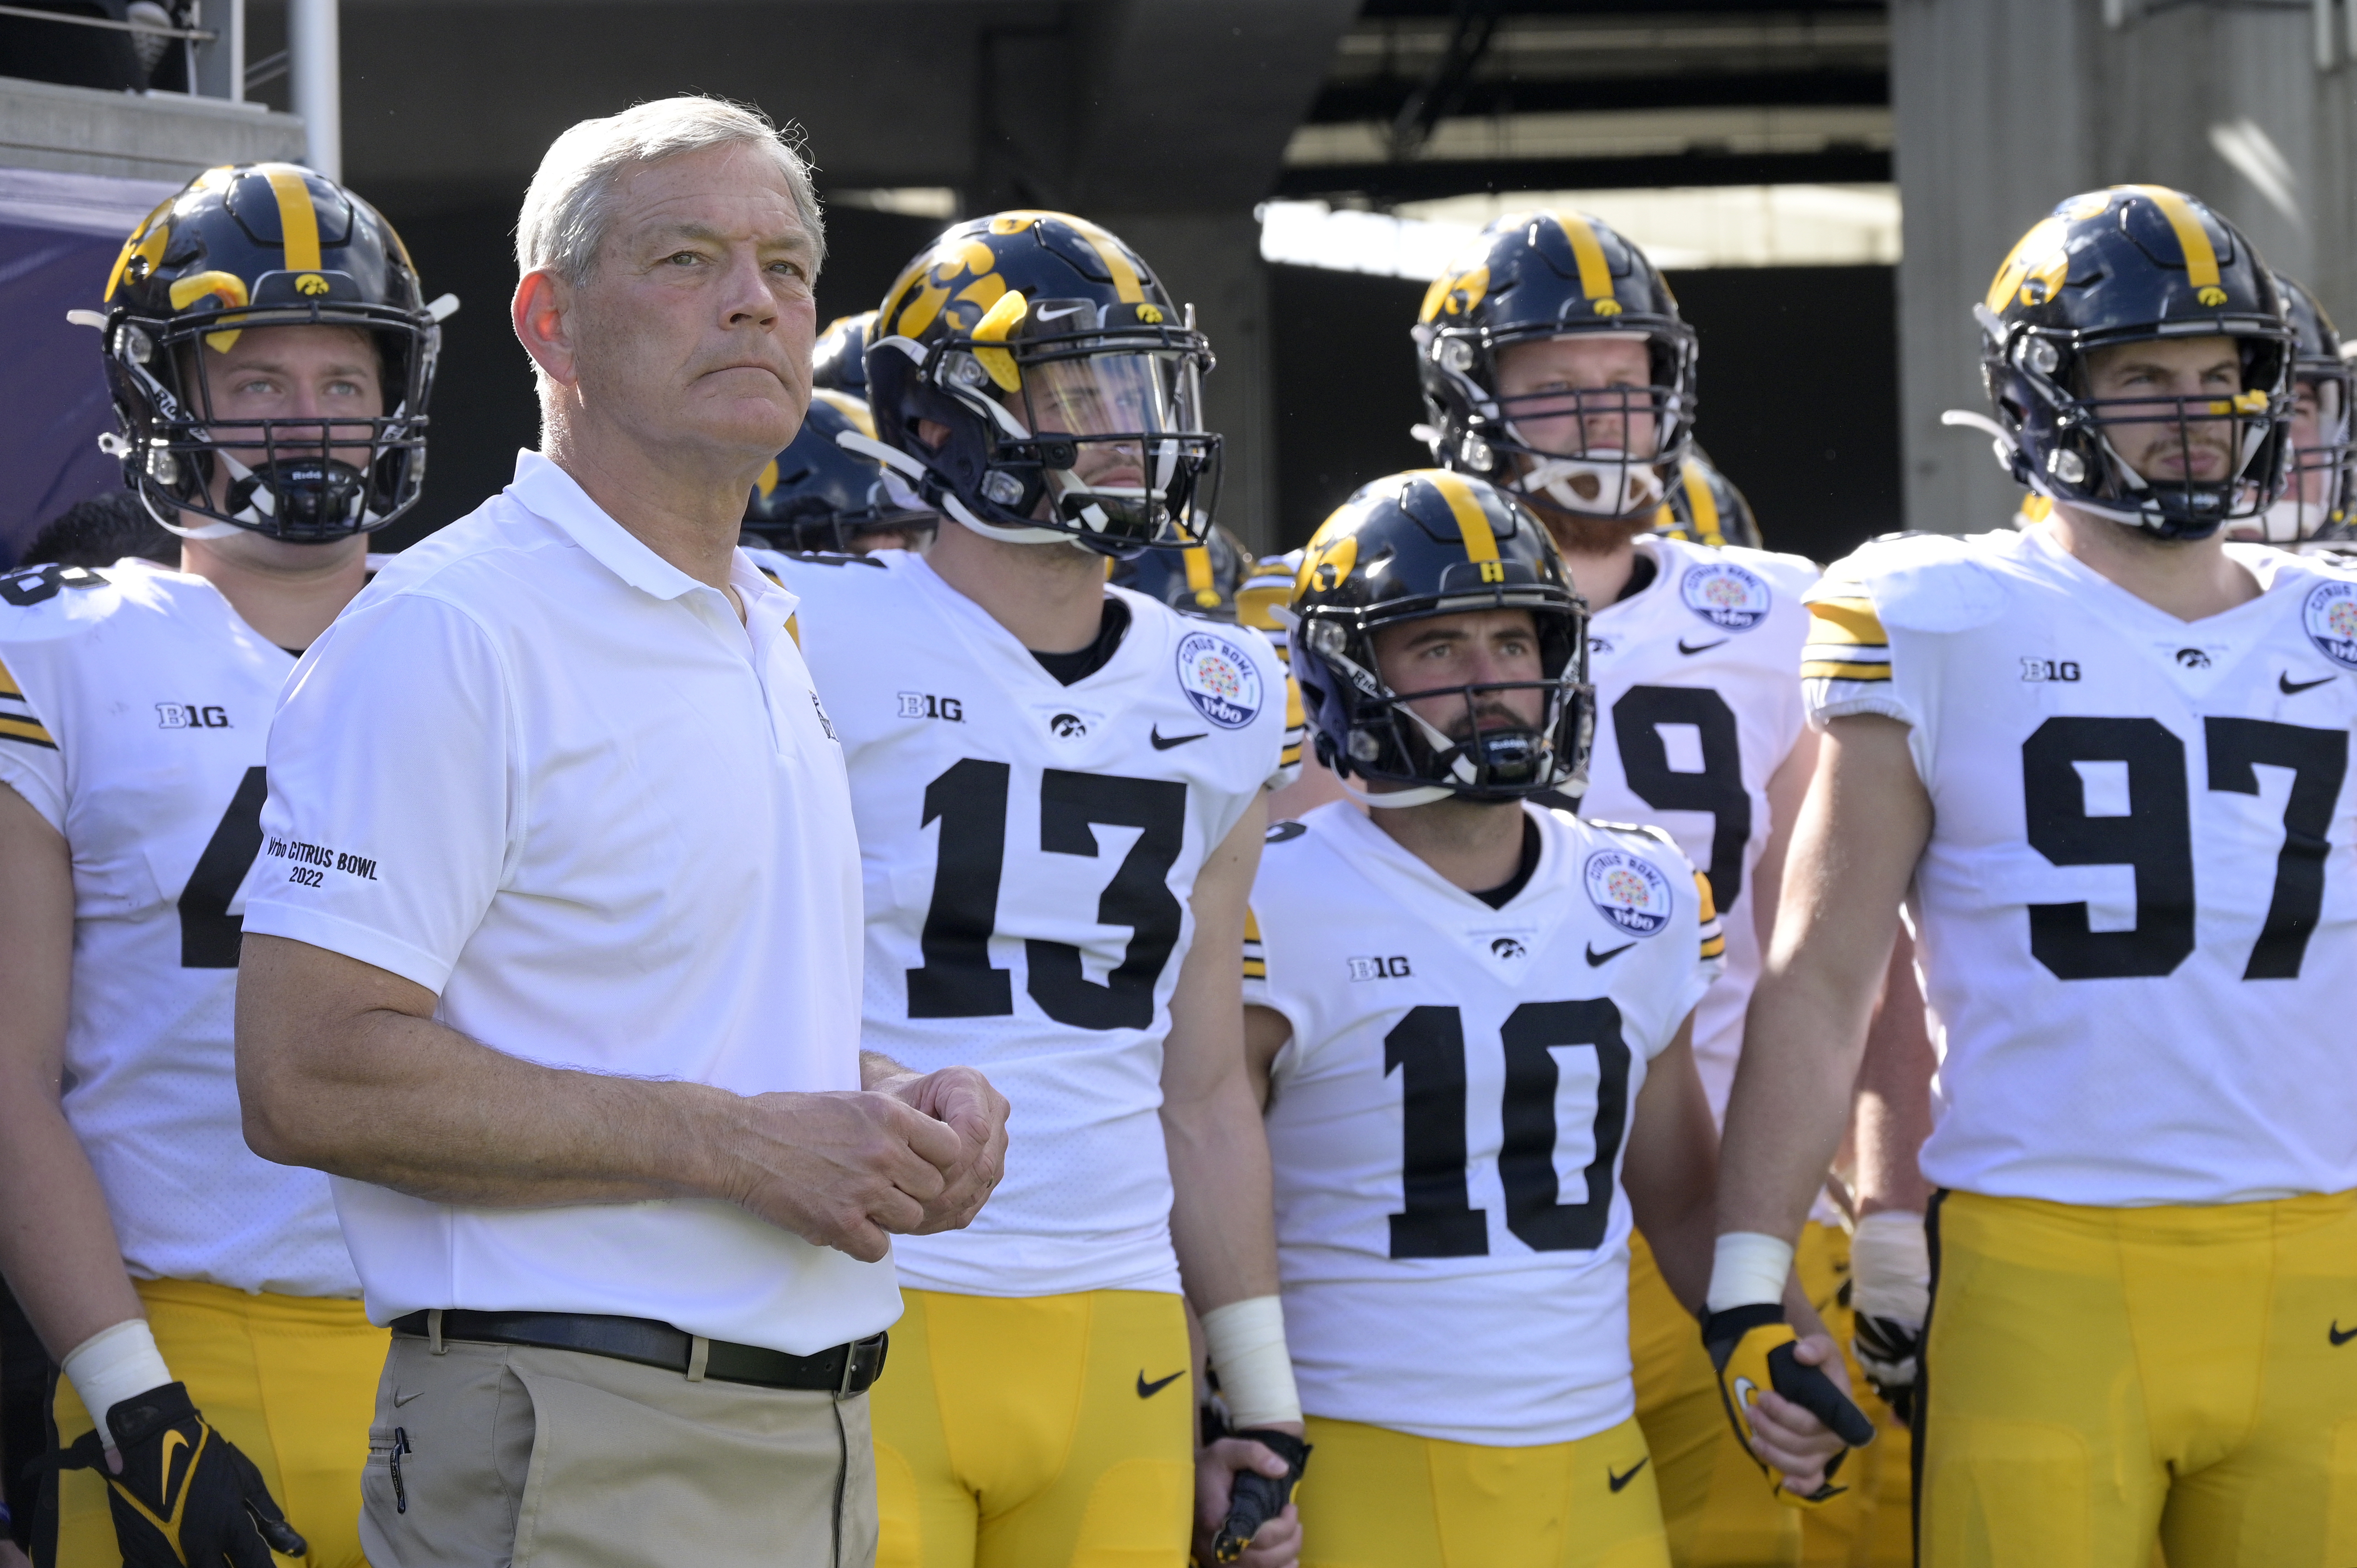 Iowa coach Kirk Ferentz disbands diversity group after call for his  dismissal - The Boston Globe